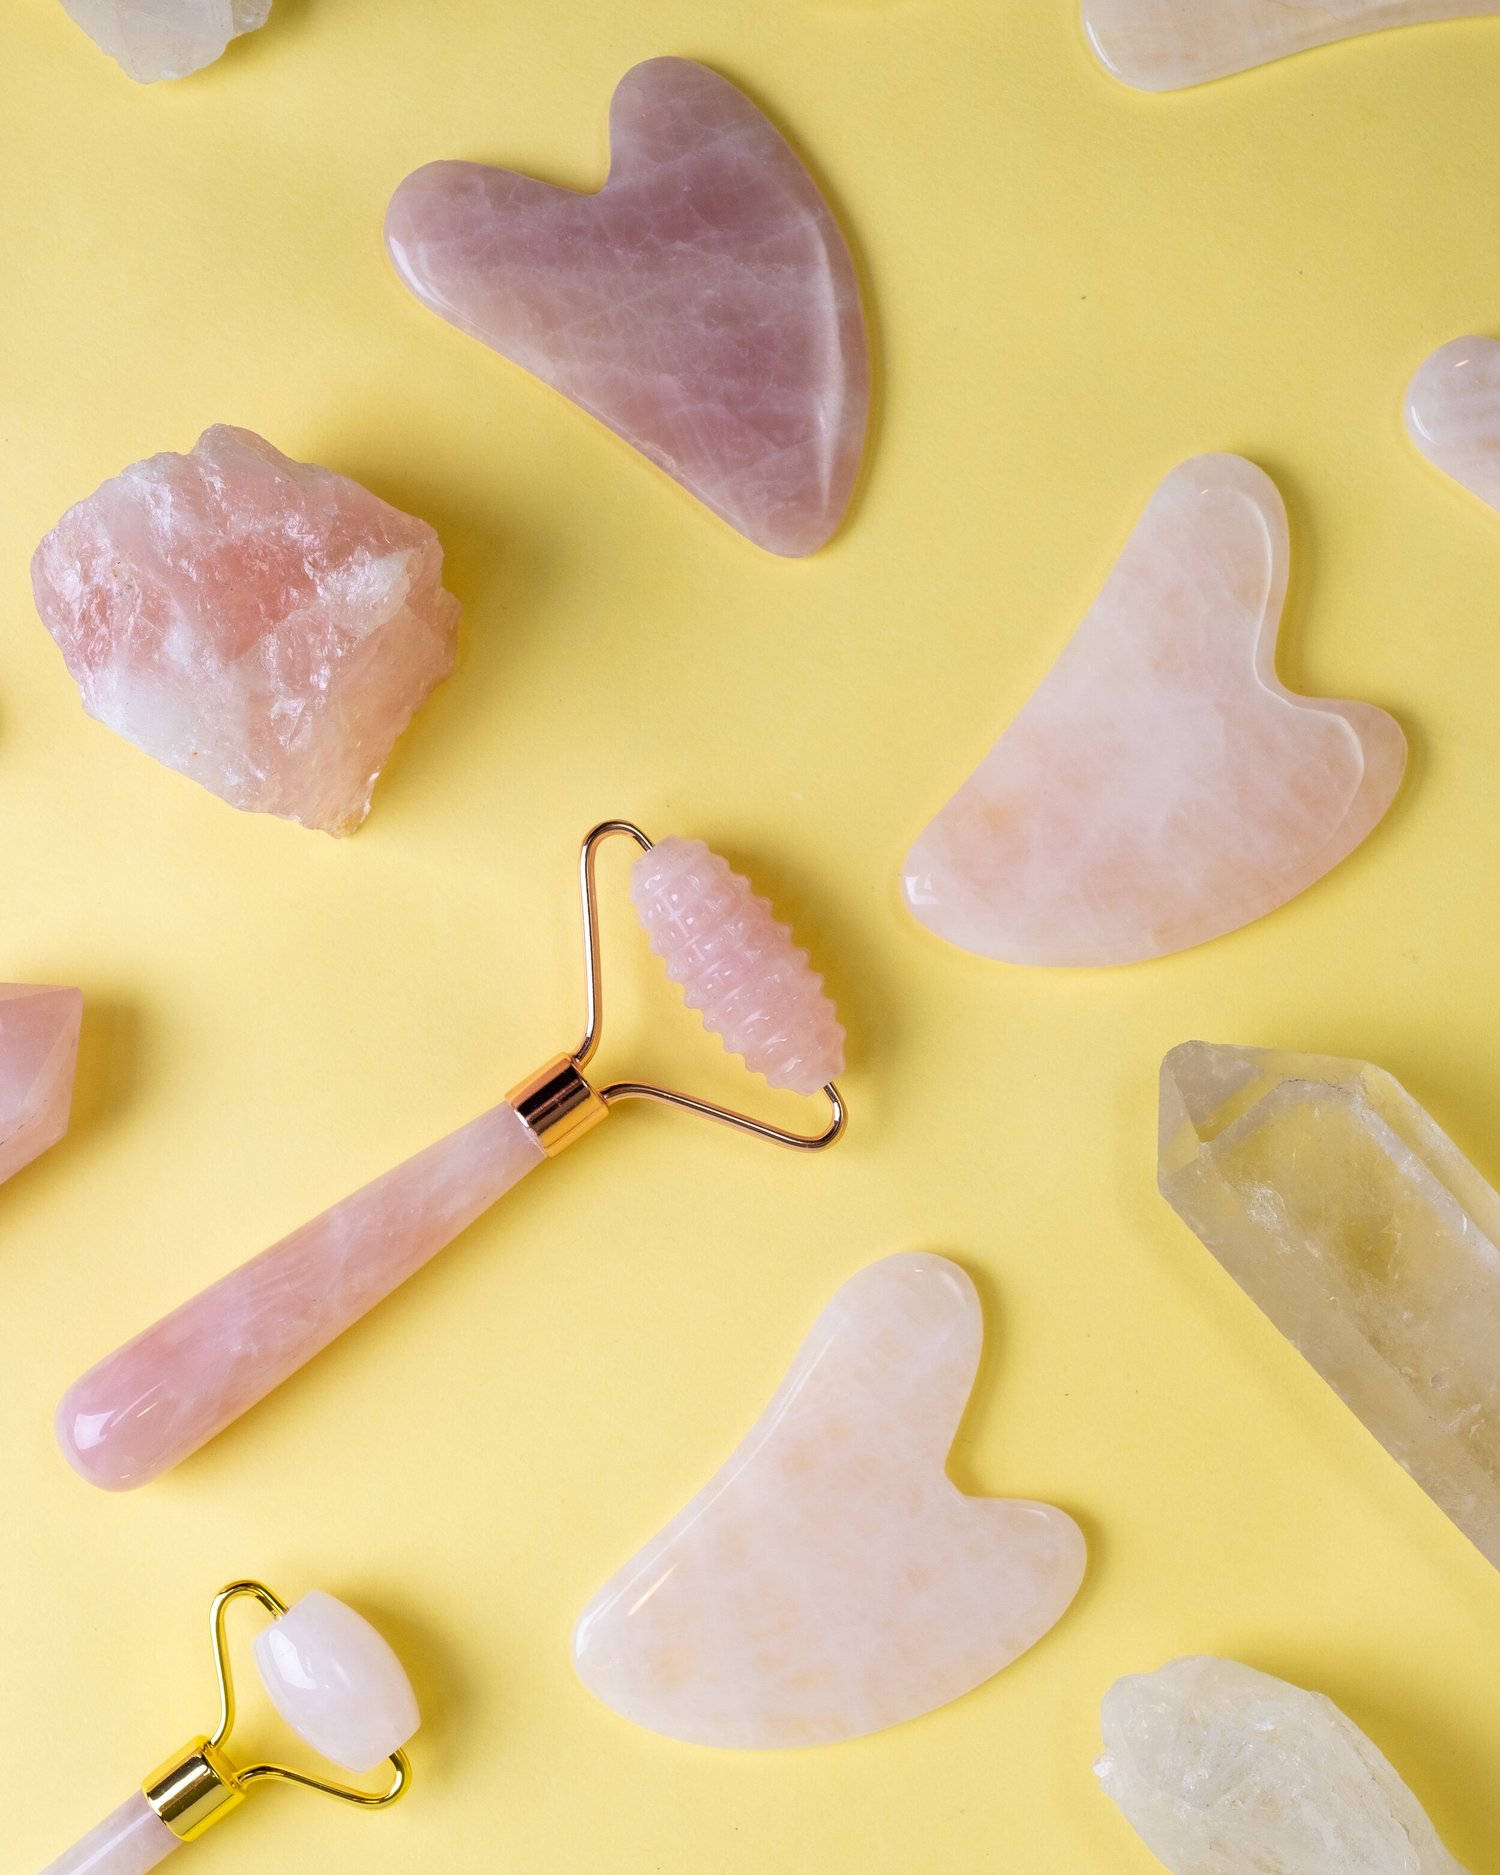 Facial Gua Sha Workshop (Online) August 18, 6:30pm EDT — Emily Grace  Acupuncture  New York based acupuncture clinic specializing in women of color  acupuncture, fertility and menstrual health, Traditional Chinese Medicine  and more